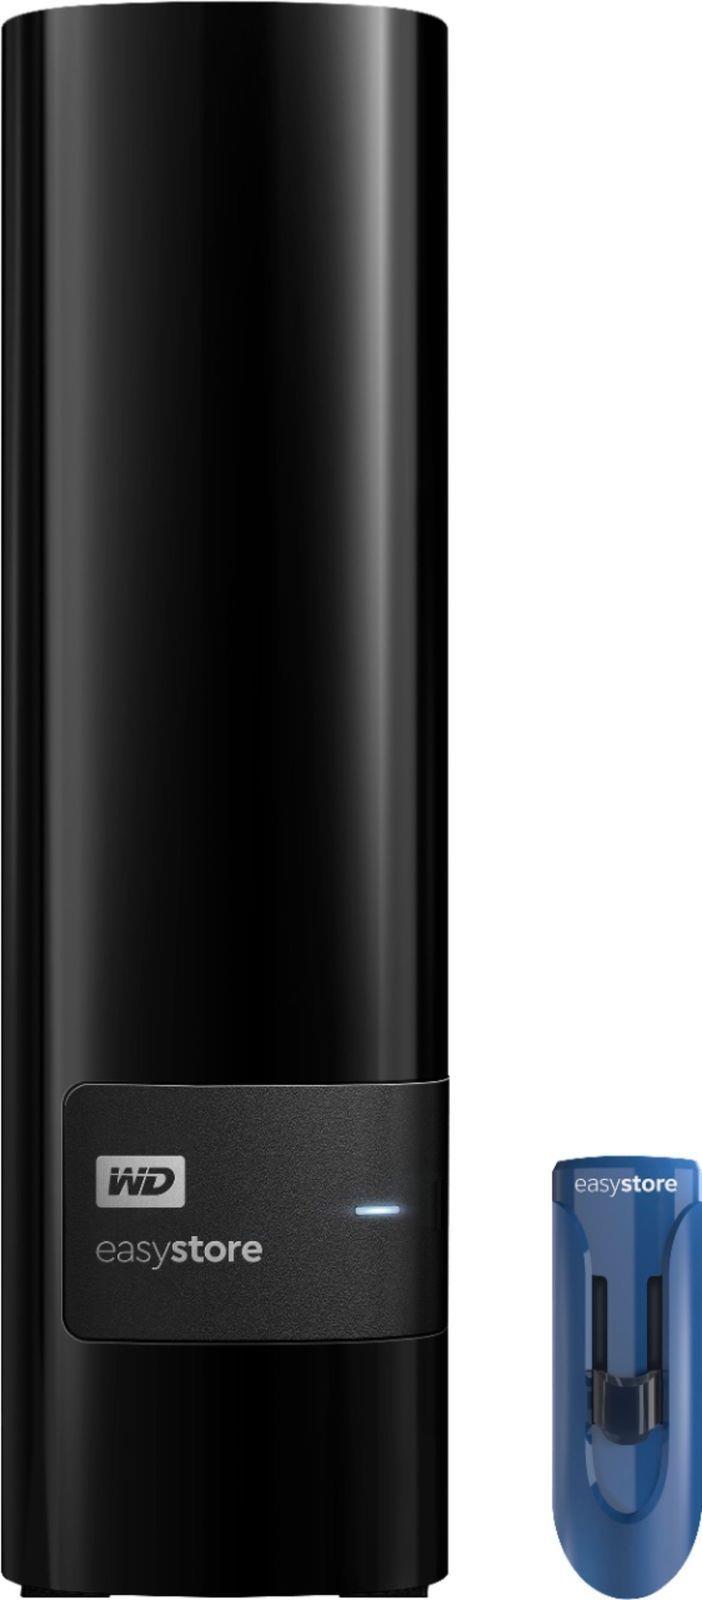 WD - Easystore 10TB External USB 3.0 Hard Drive with 32GB Easystore USB Flash